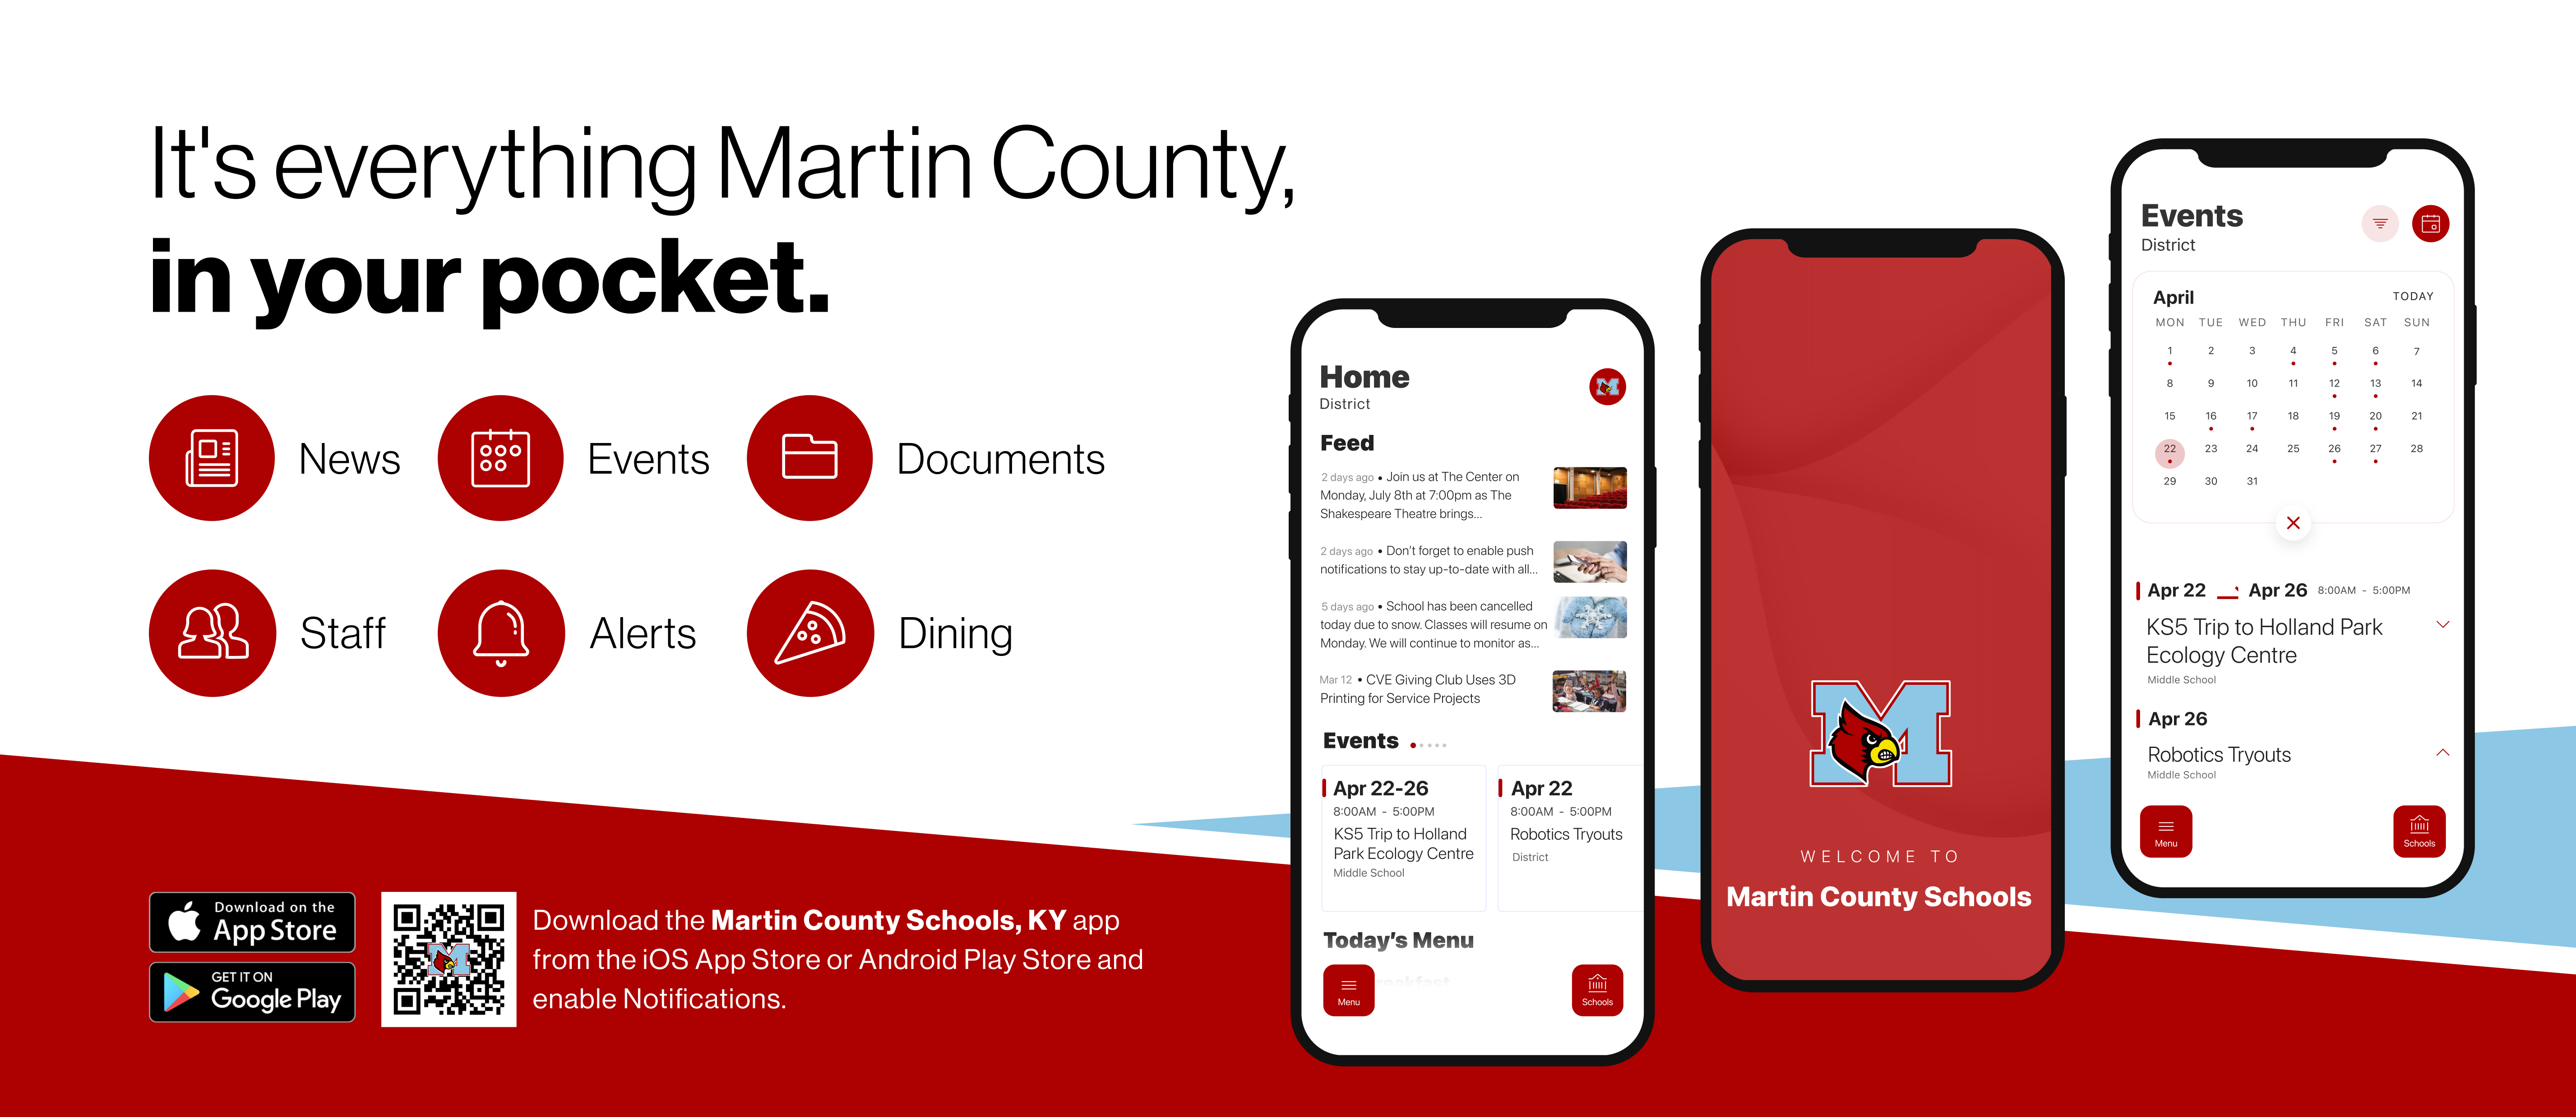 It's everything Martin County in your pocket. News, Events, Documents, Staff, Alerts, & Dining. Download the martin county schools, ky app from the iOs or android play store and enable notifications.